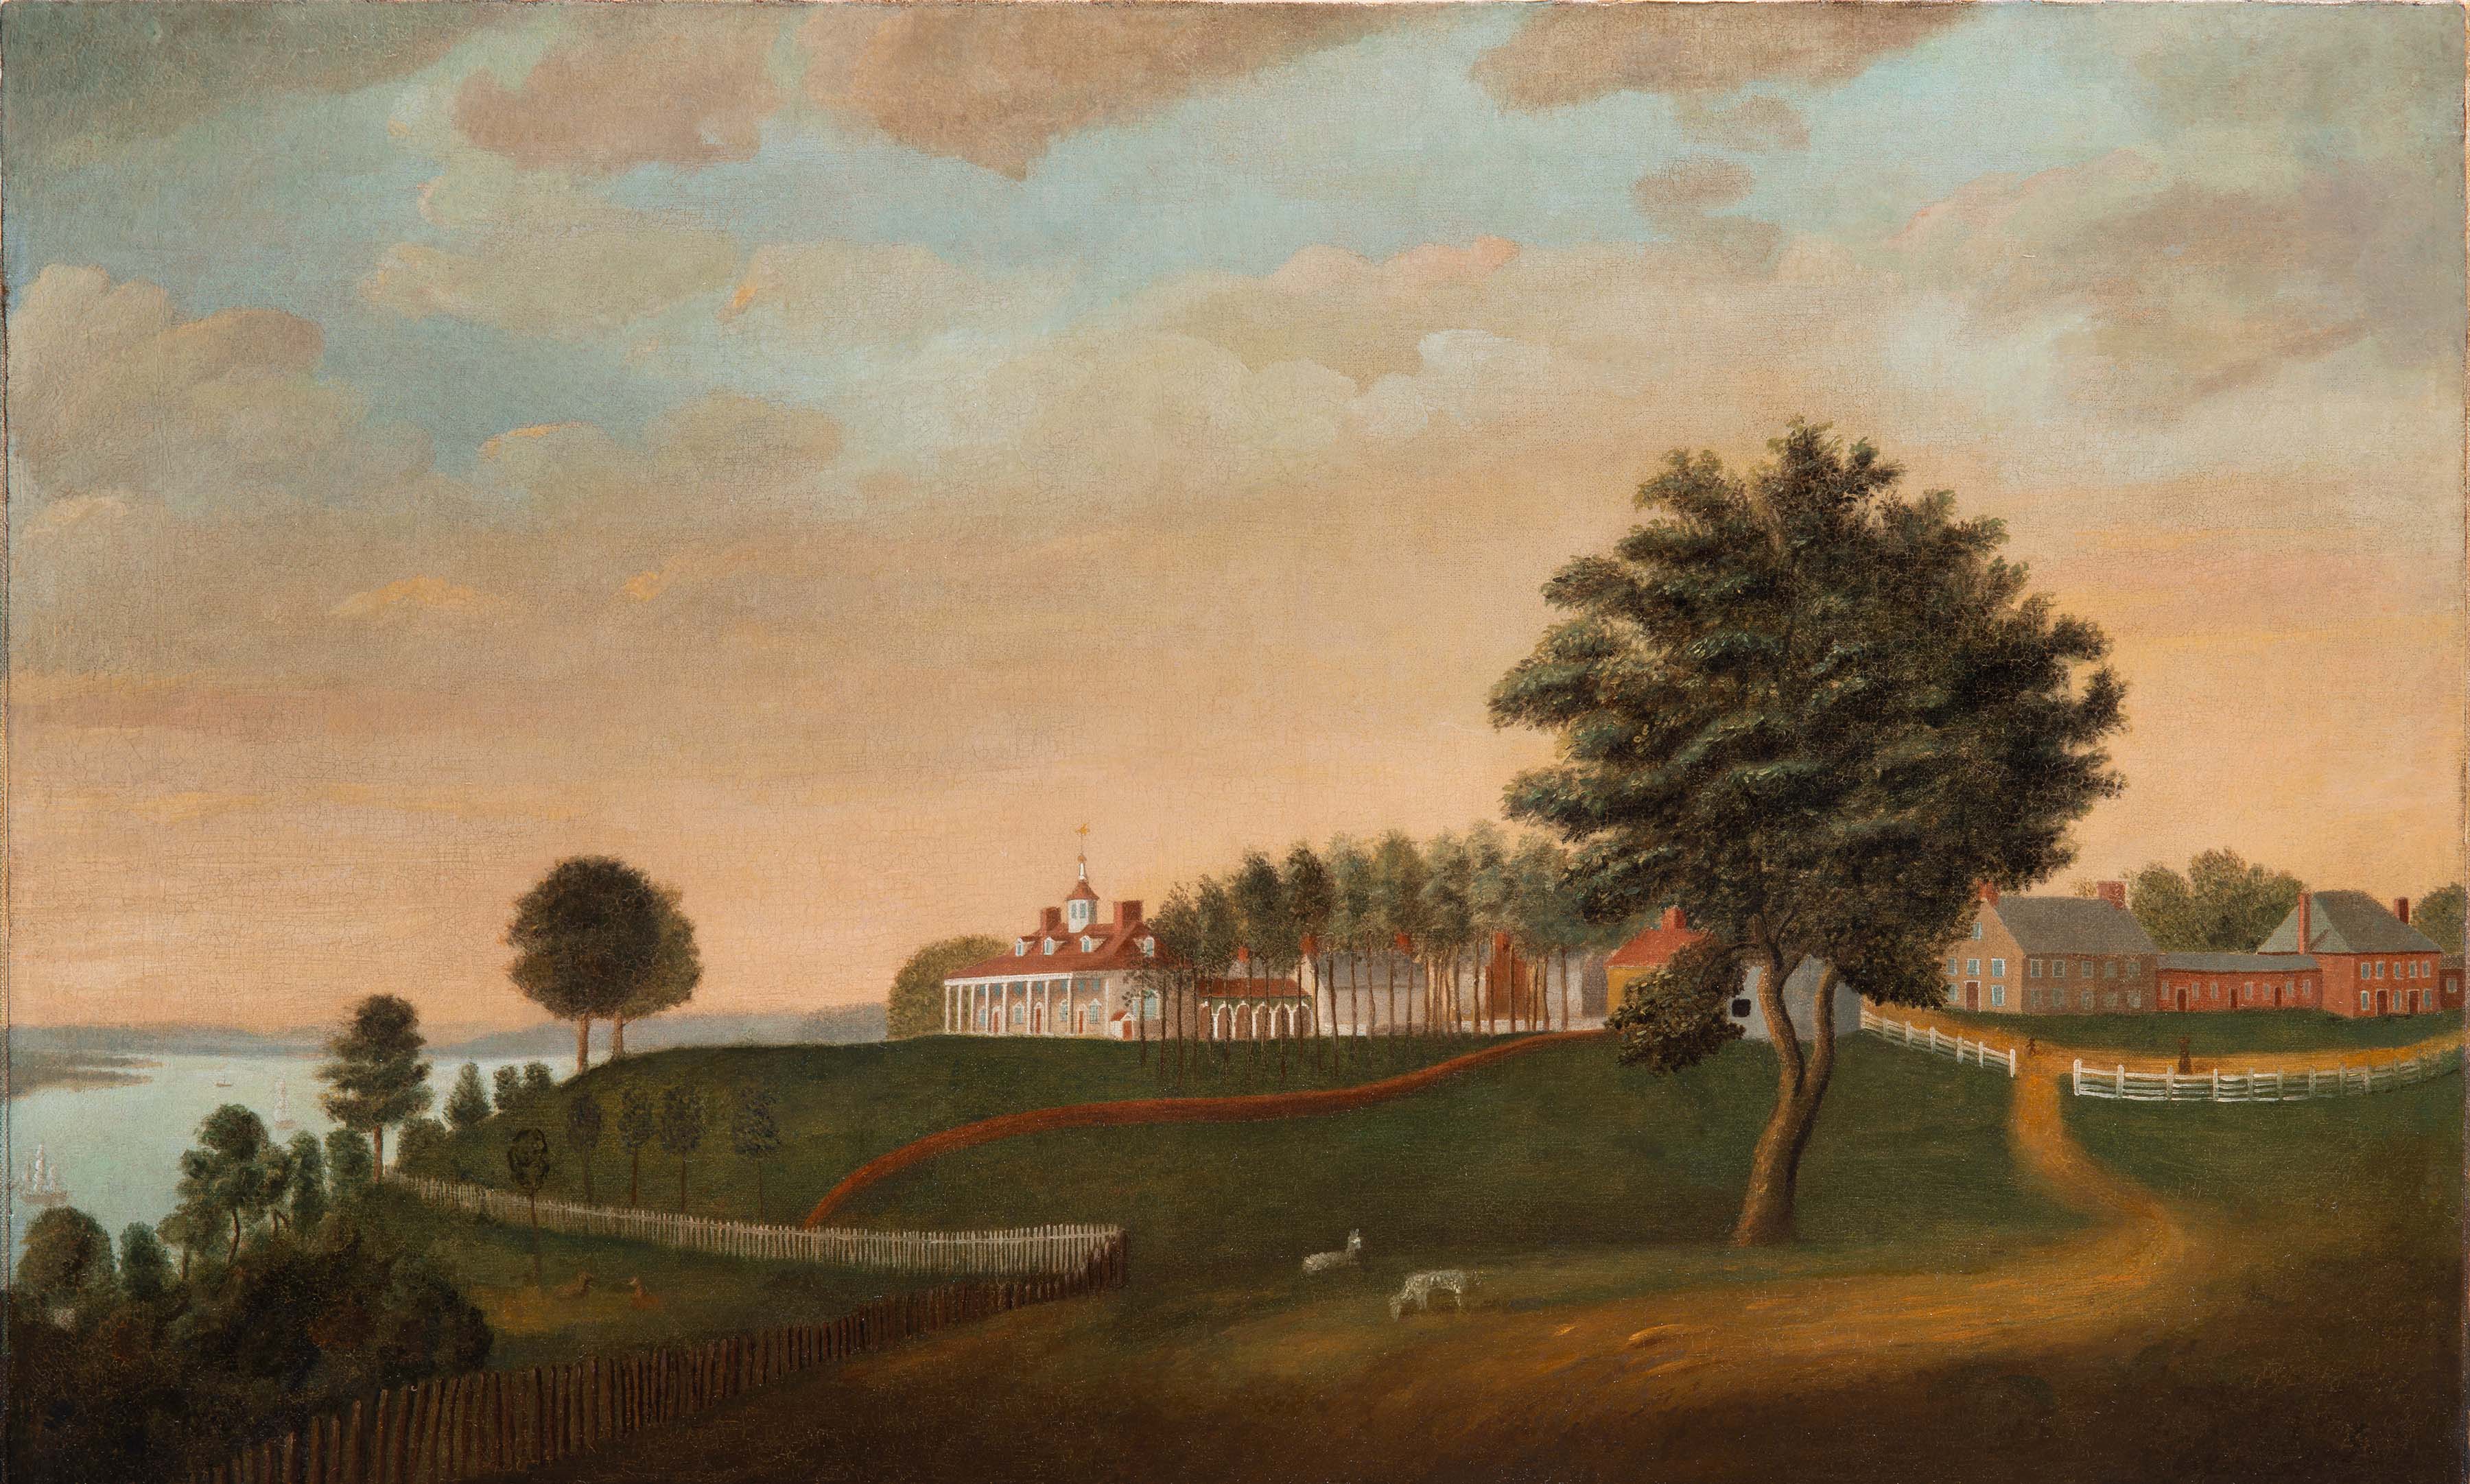 The East Front Of Mount Vernon By Edward Savage courtesy of the Mount Vernon Ladies' Association, Bequest of Helen W Thompson